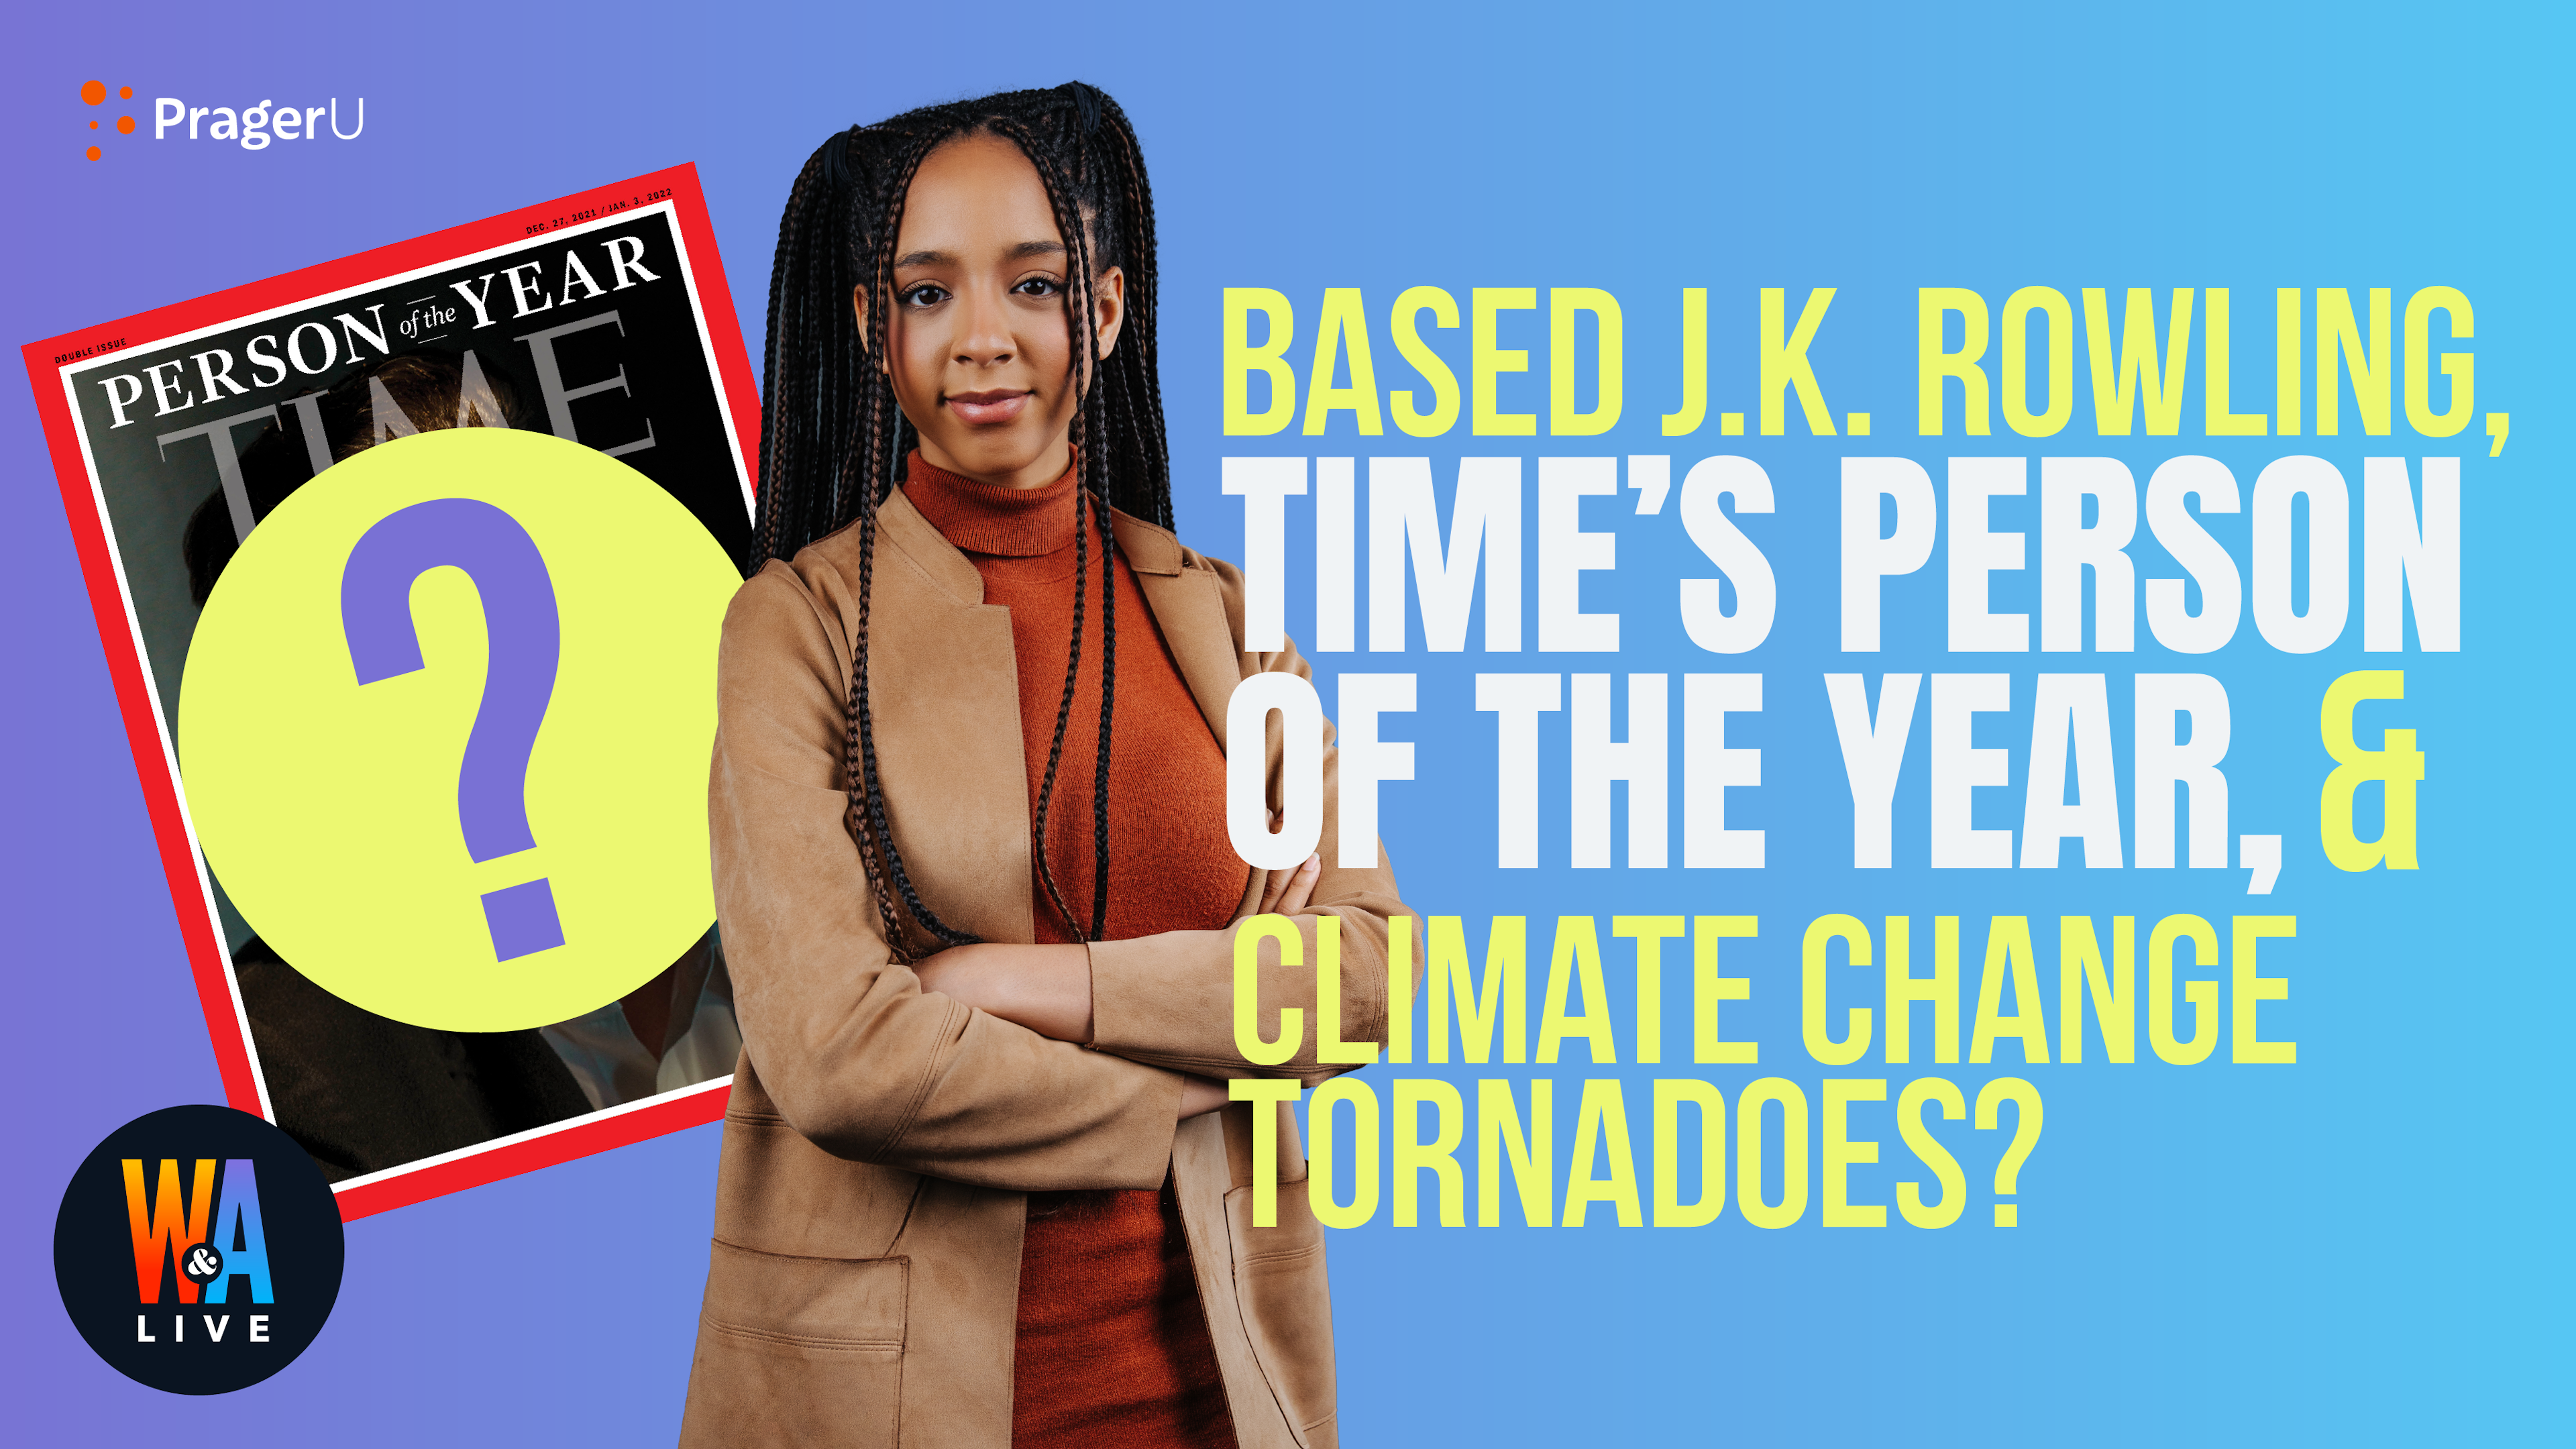 Based J.K. Rowling, Time’s Person of the Year, & Tornadoes?: 12/13/21